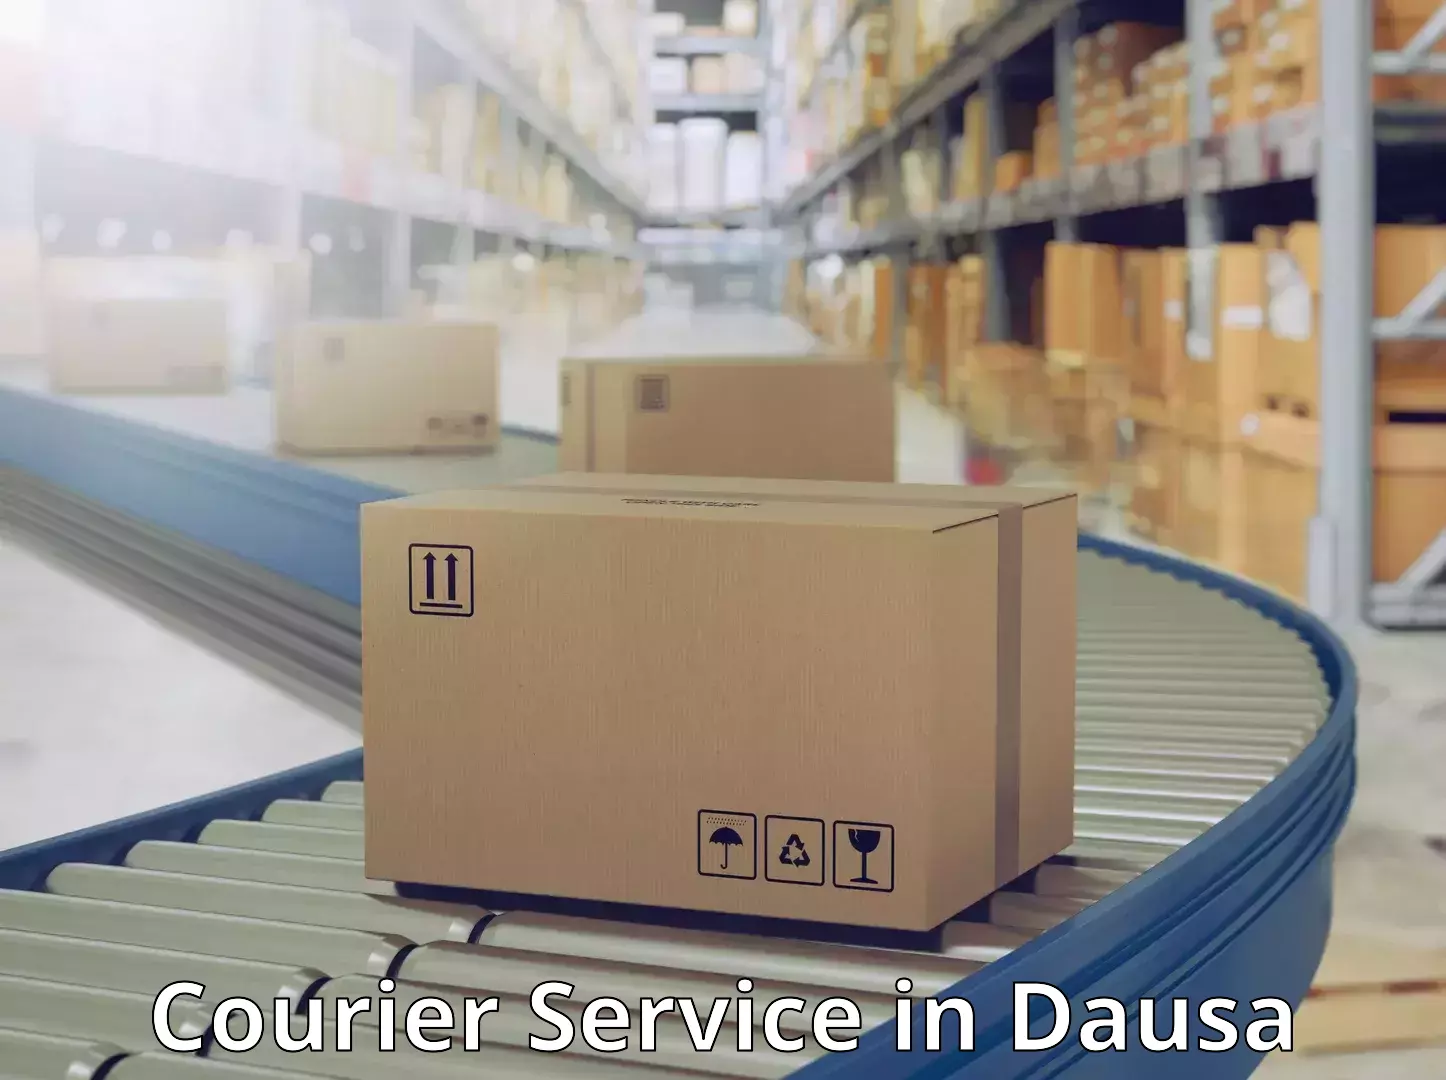 Parcel delivery automation in Dausa